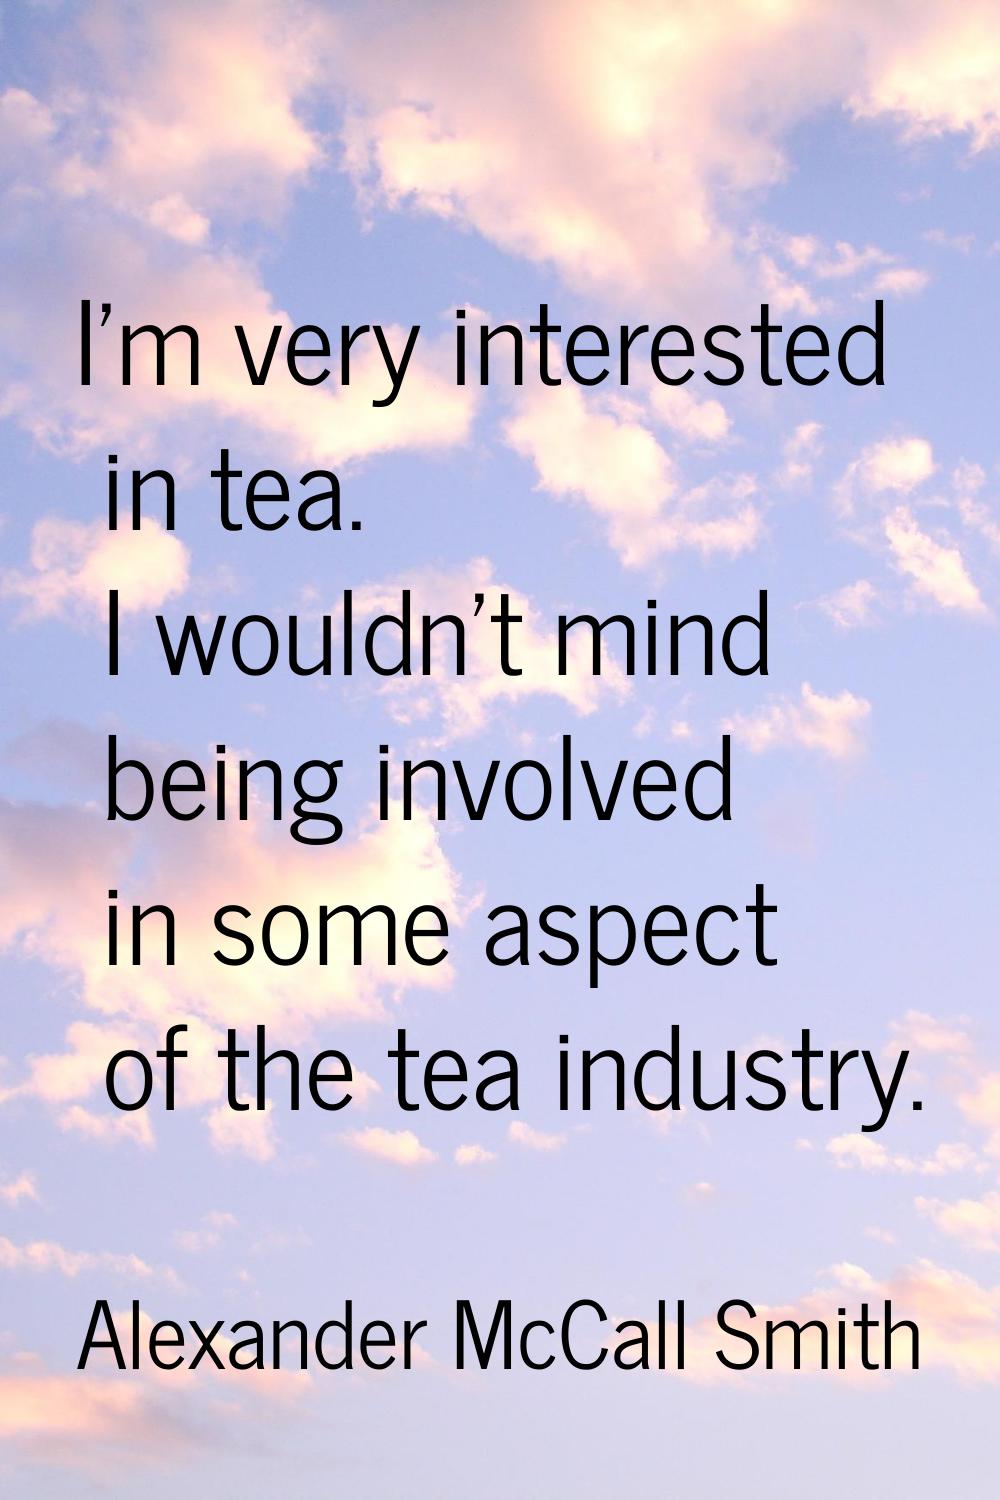 I'm very interested in tea. I wouldn't mind being involved in some aspect of the tea industry.